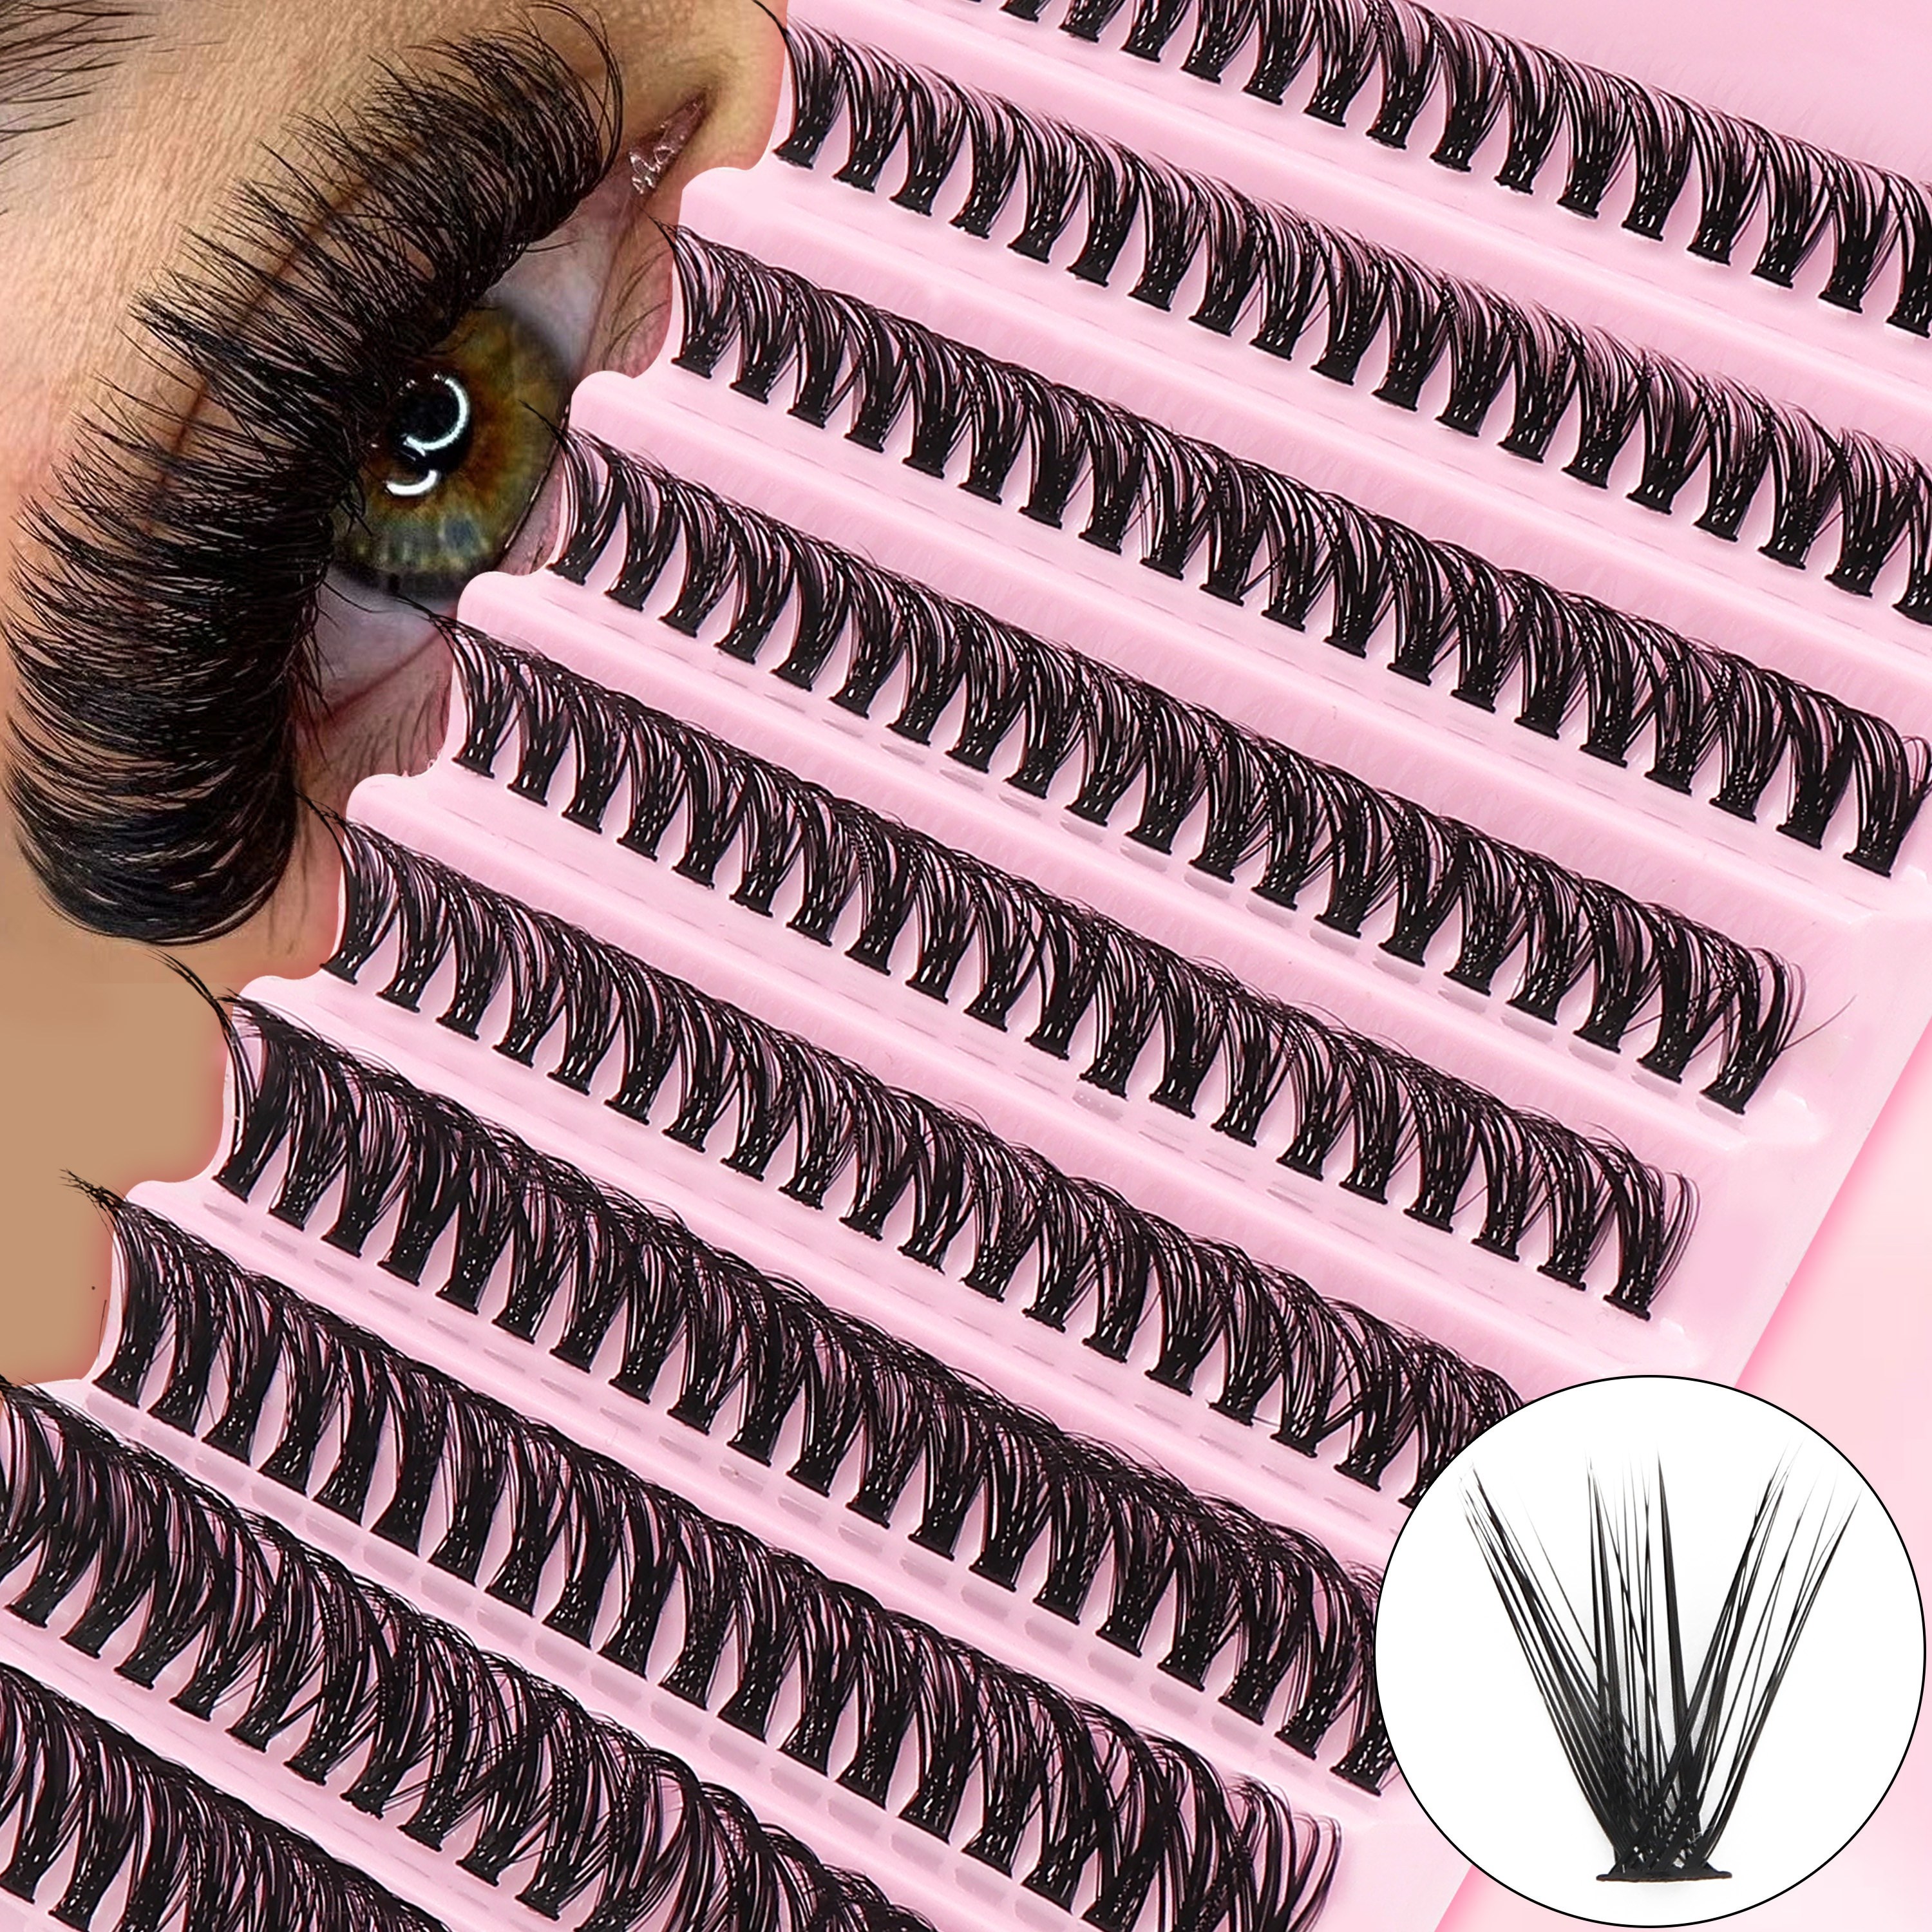 

Luxurious 30d/40d/80d Mixed Length (8-16mm) Soft & Curly Faux Mink Eyelash Extensions, 200pcs - Waterproof, D For All Occasions, Beginner Friendly & Reusable